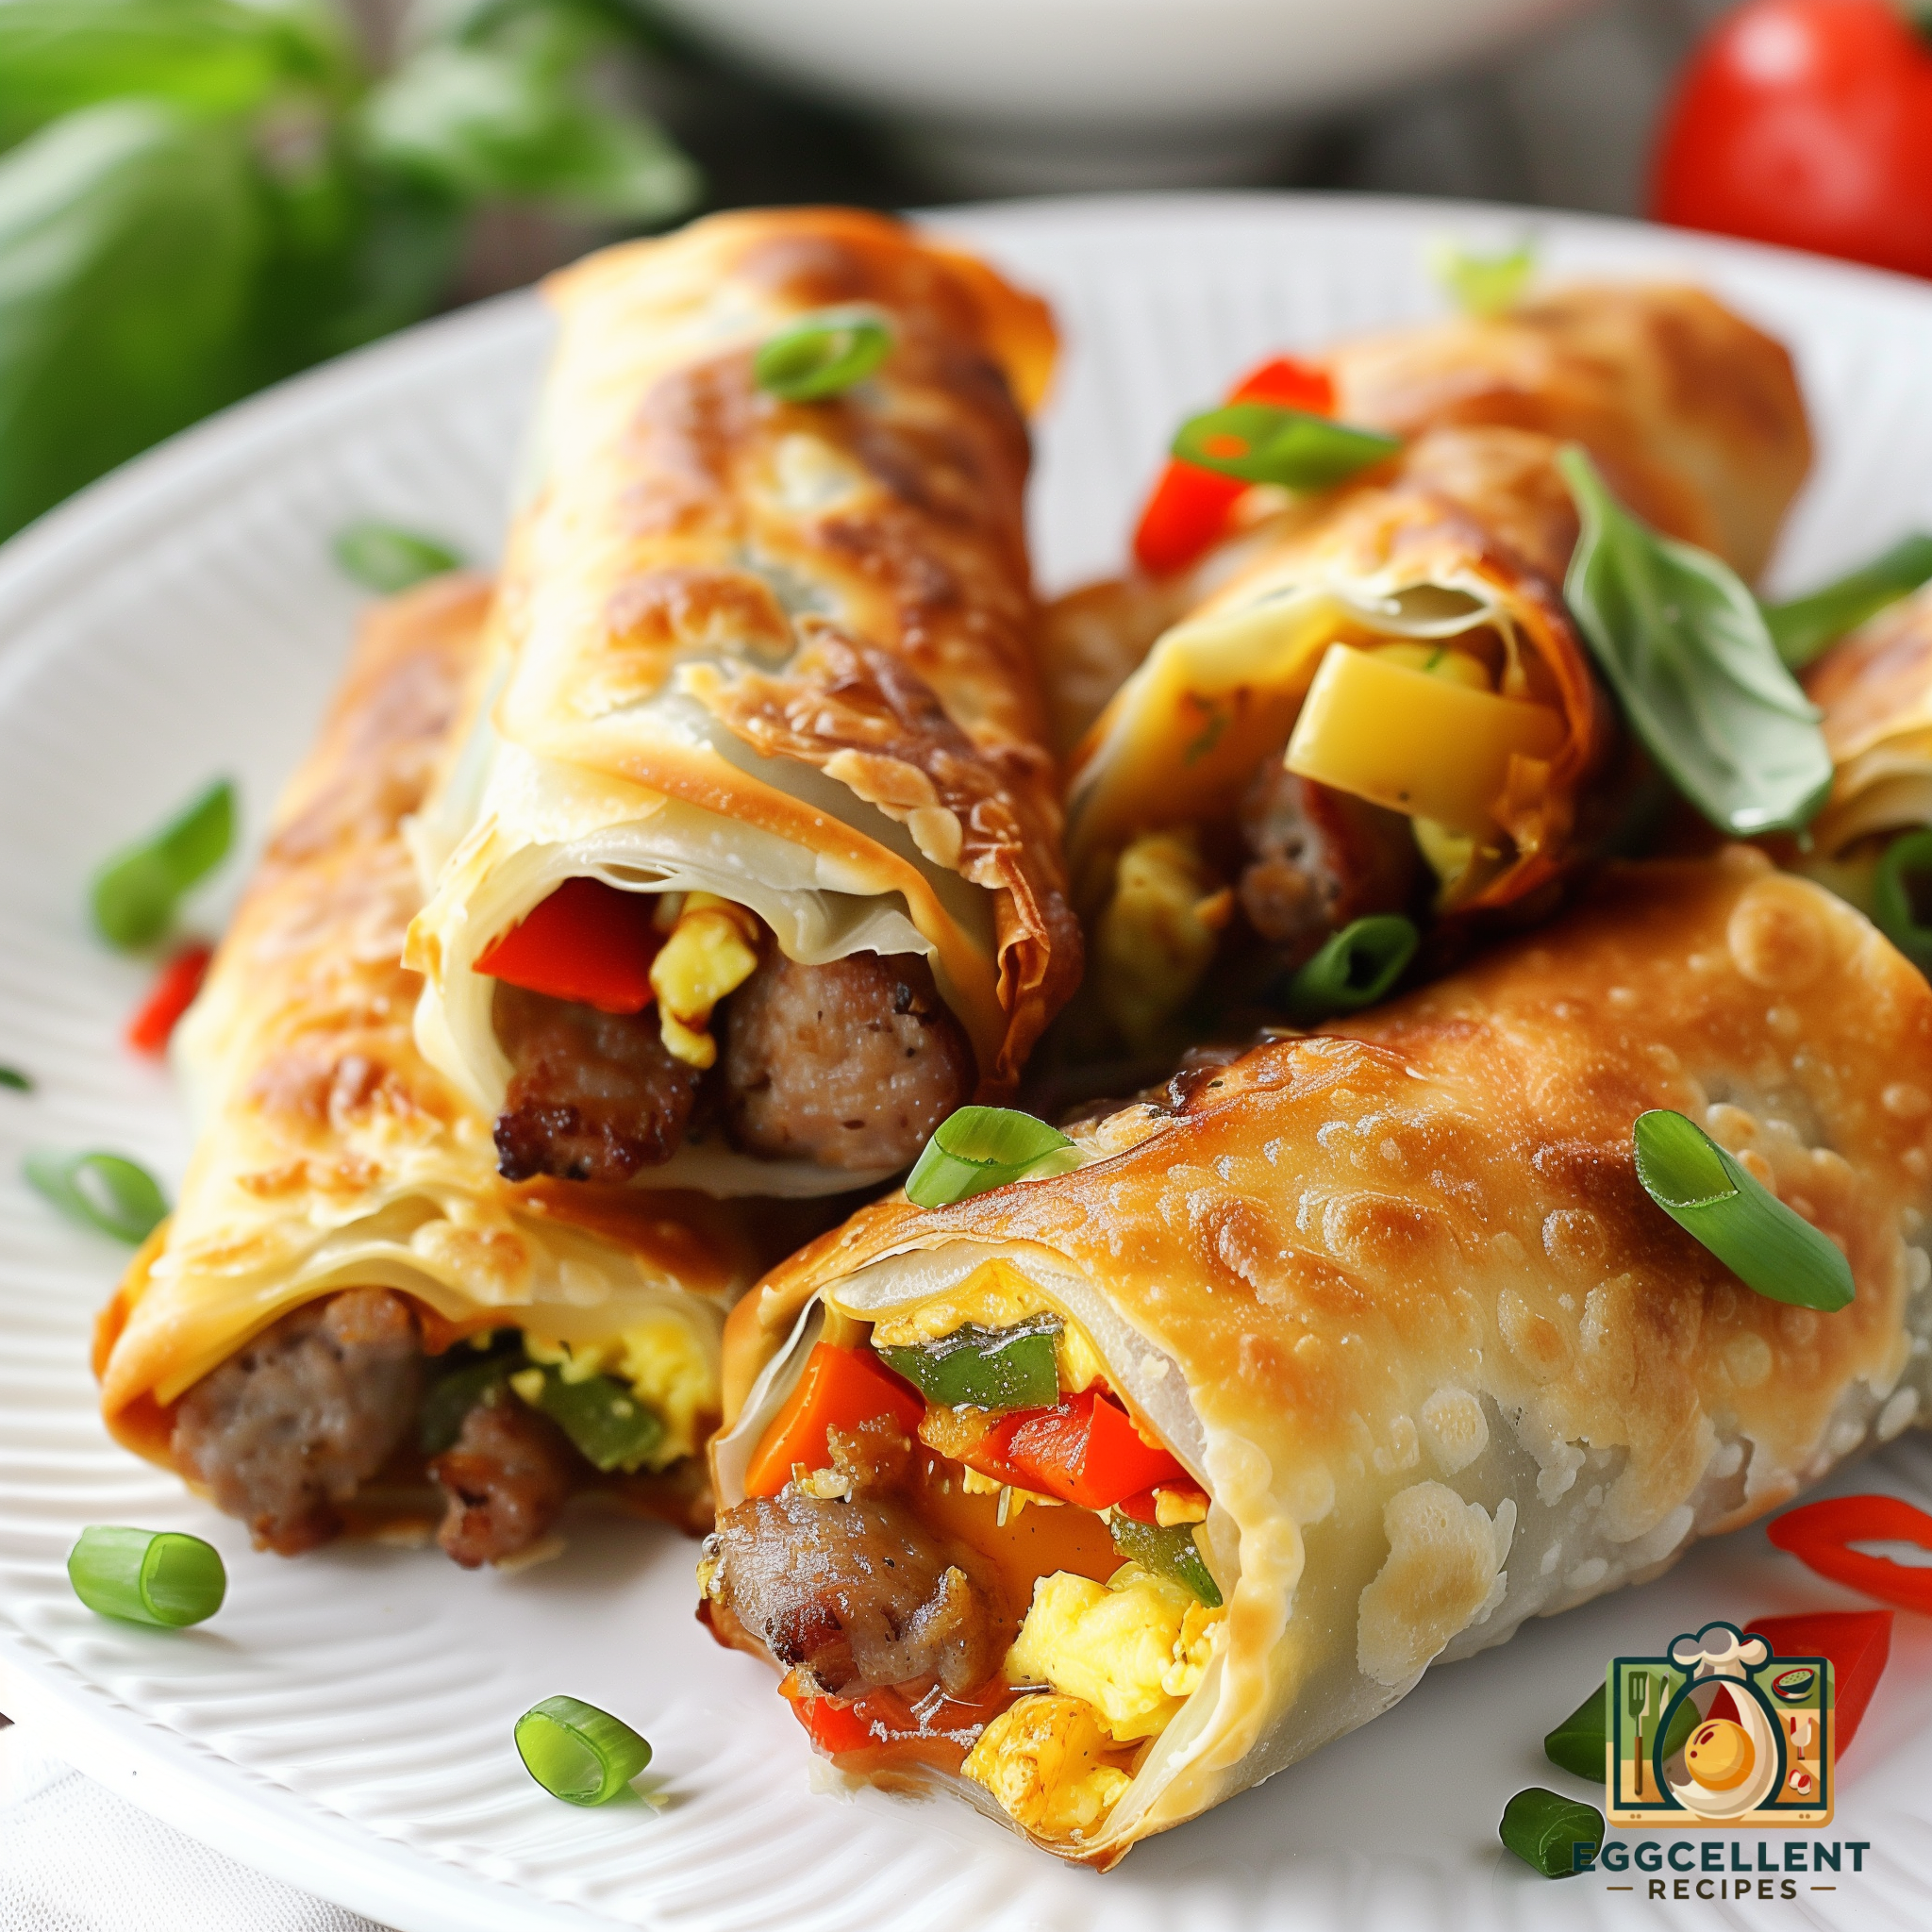 Breakfast Egg Rolls with Sausage and Peppers Recipe